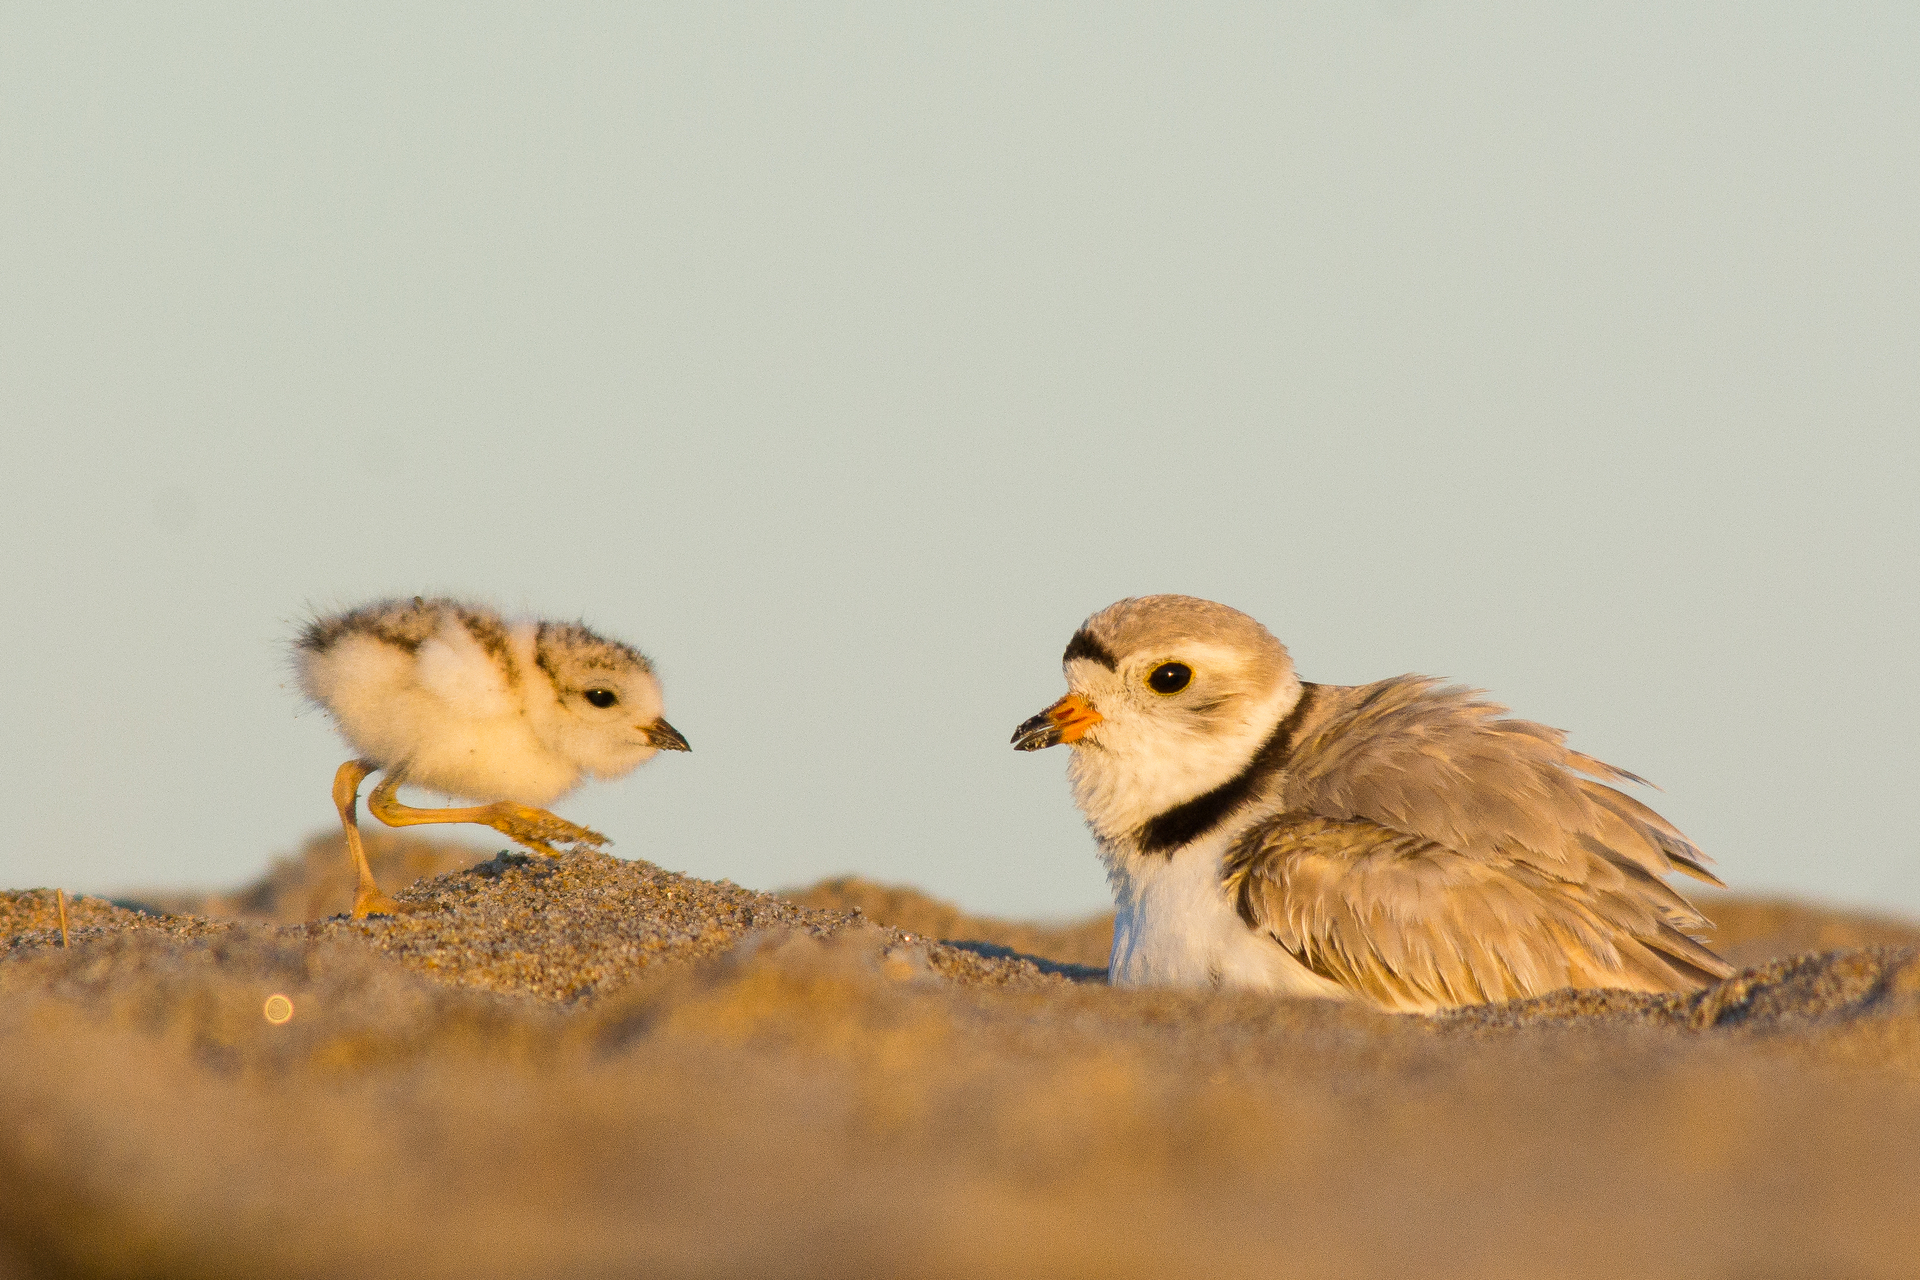 A Piping Plover chick and adult on a beach